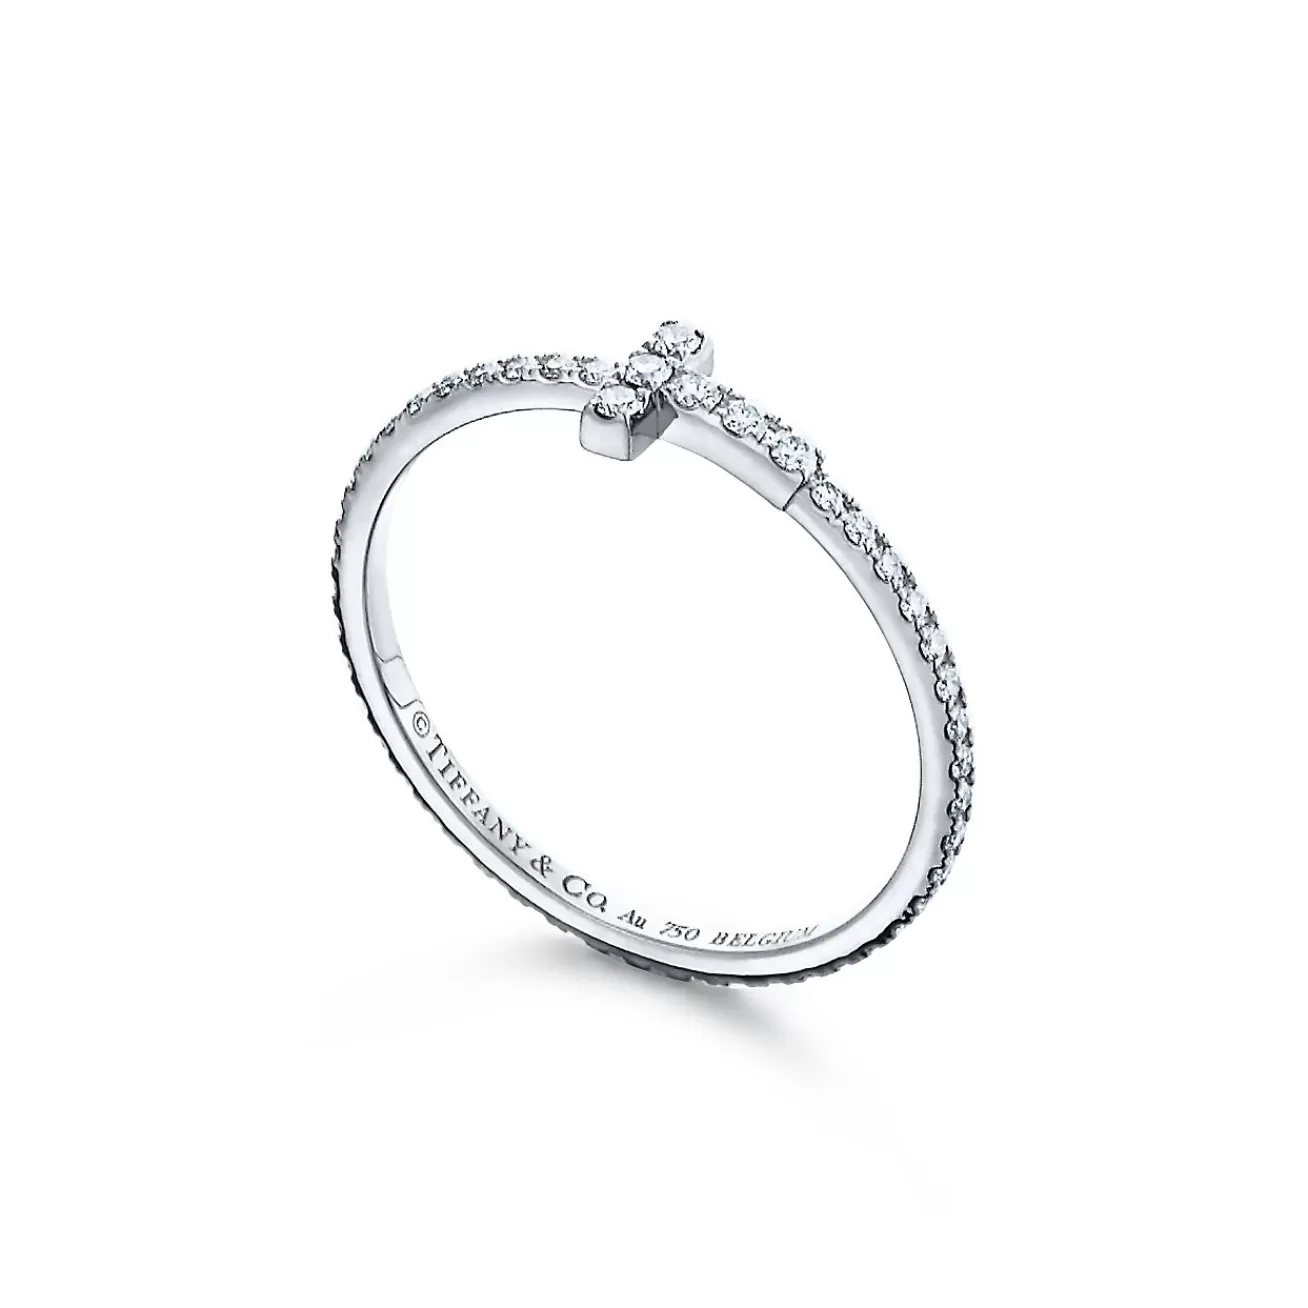 Tiffany & Co. Tiffany T diamond wire band ring in 18k white gold. | ^ Rings | Men's Jewelry